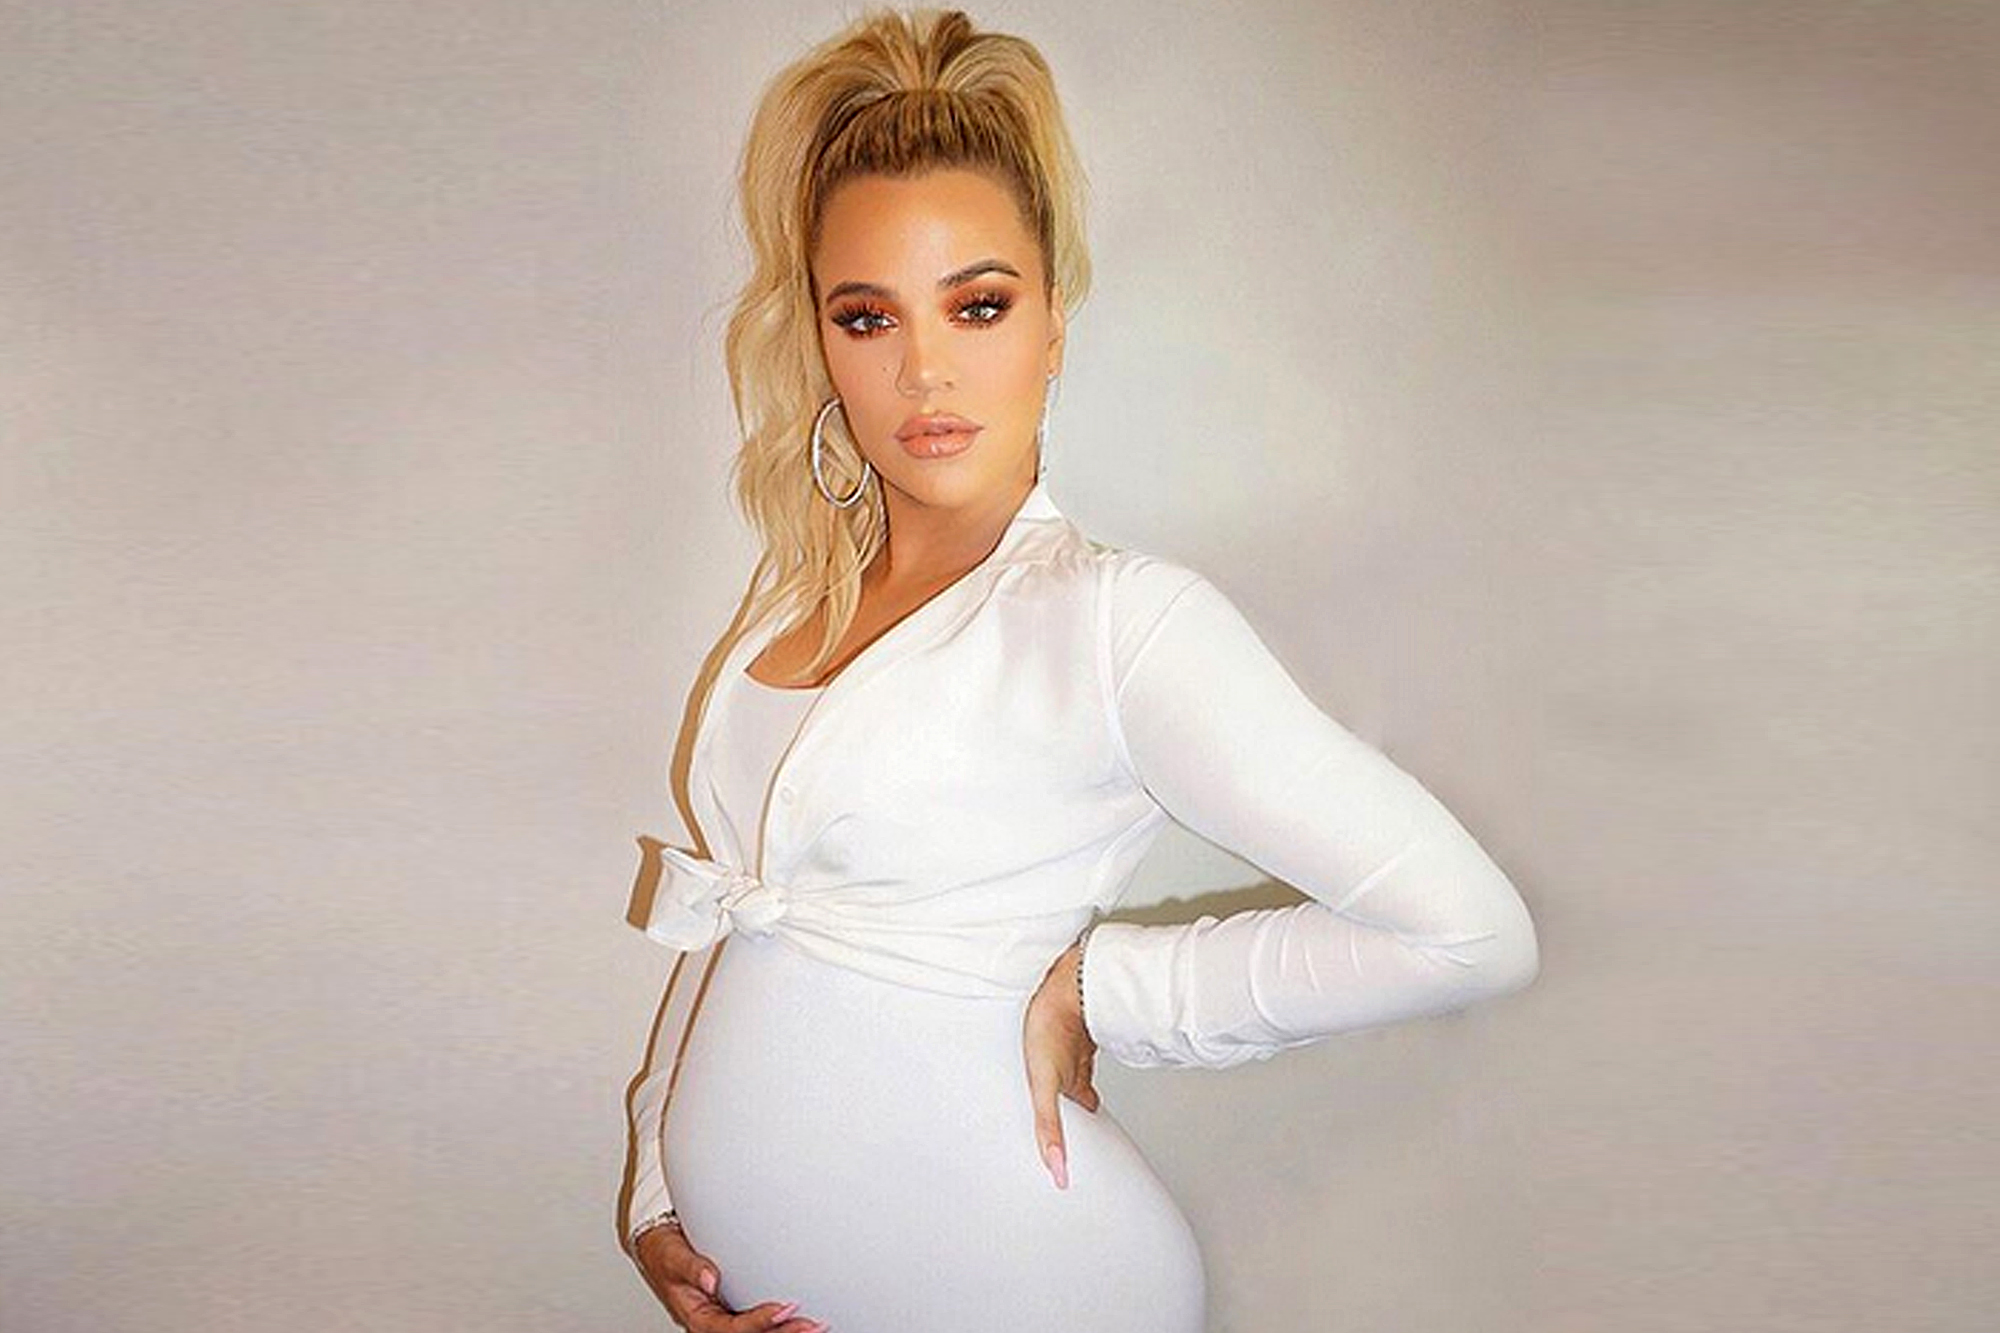 Khloé Kardashian's New Cleaning Series Is Generating So Much Buzz